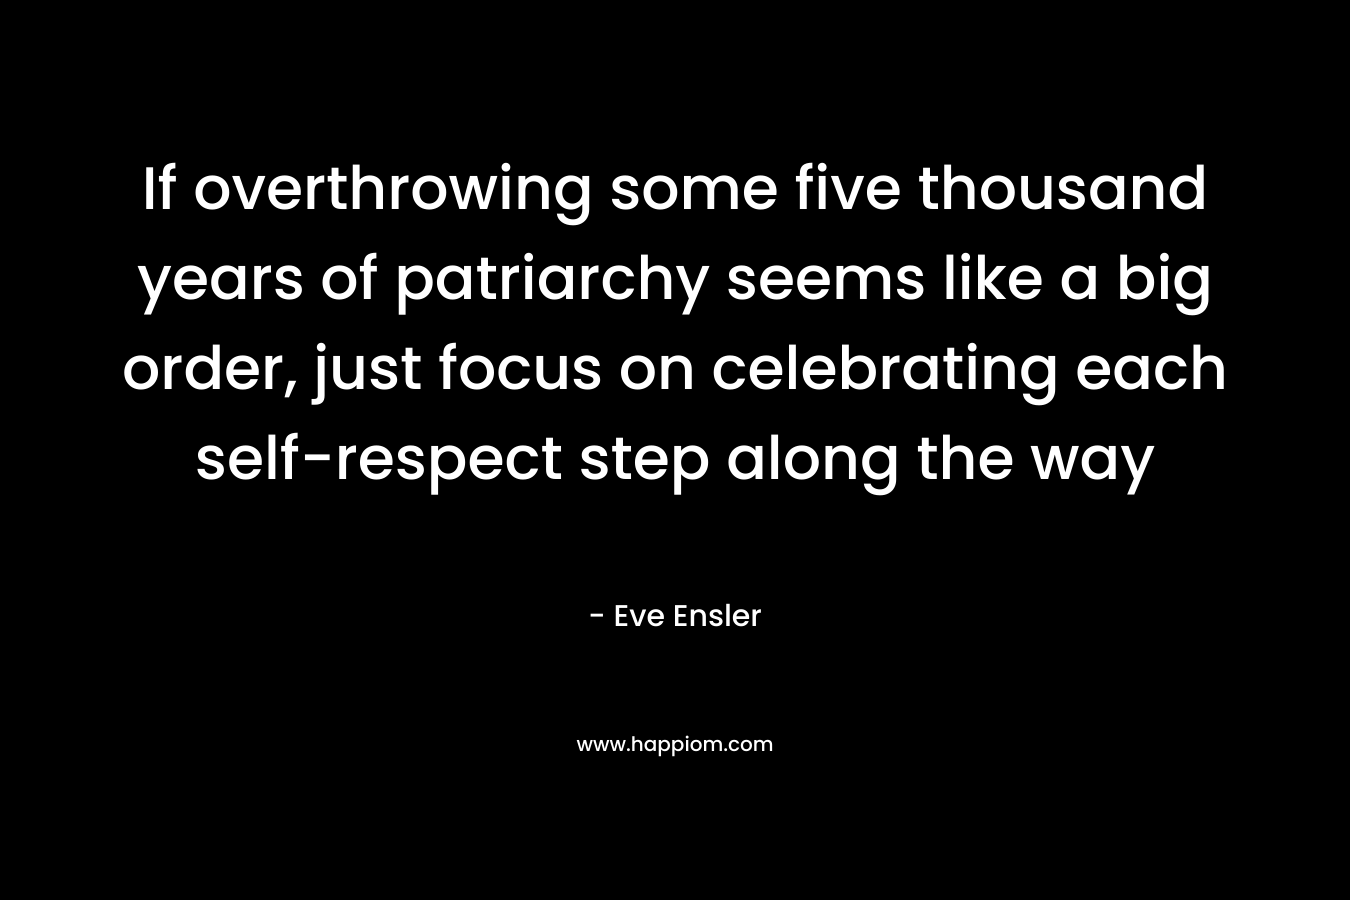 If overthrowing some five thousand years of patriarchy seems like a big order, just focus on celebrating each self-respect step along the way